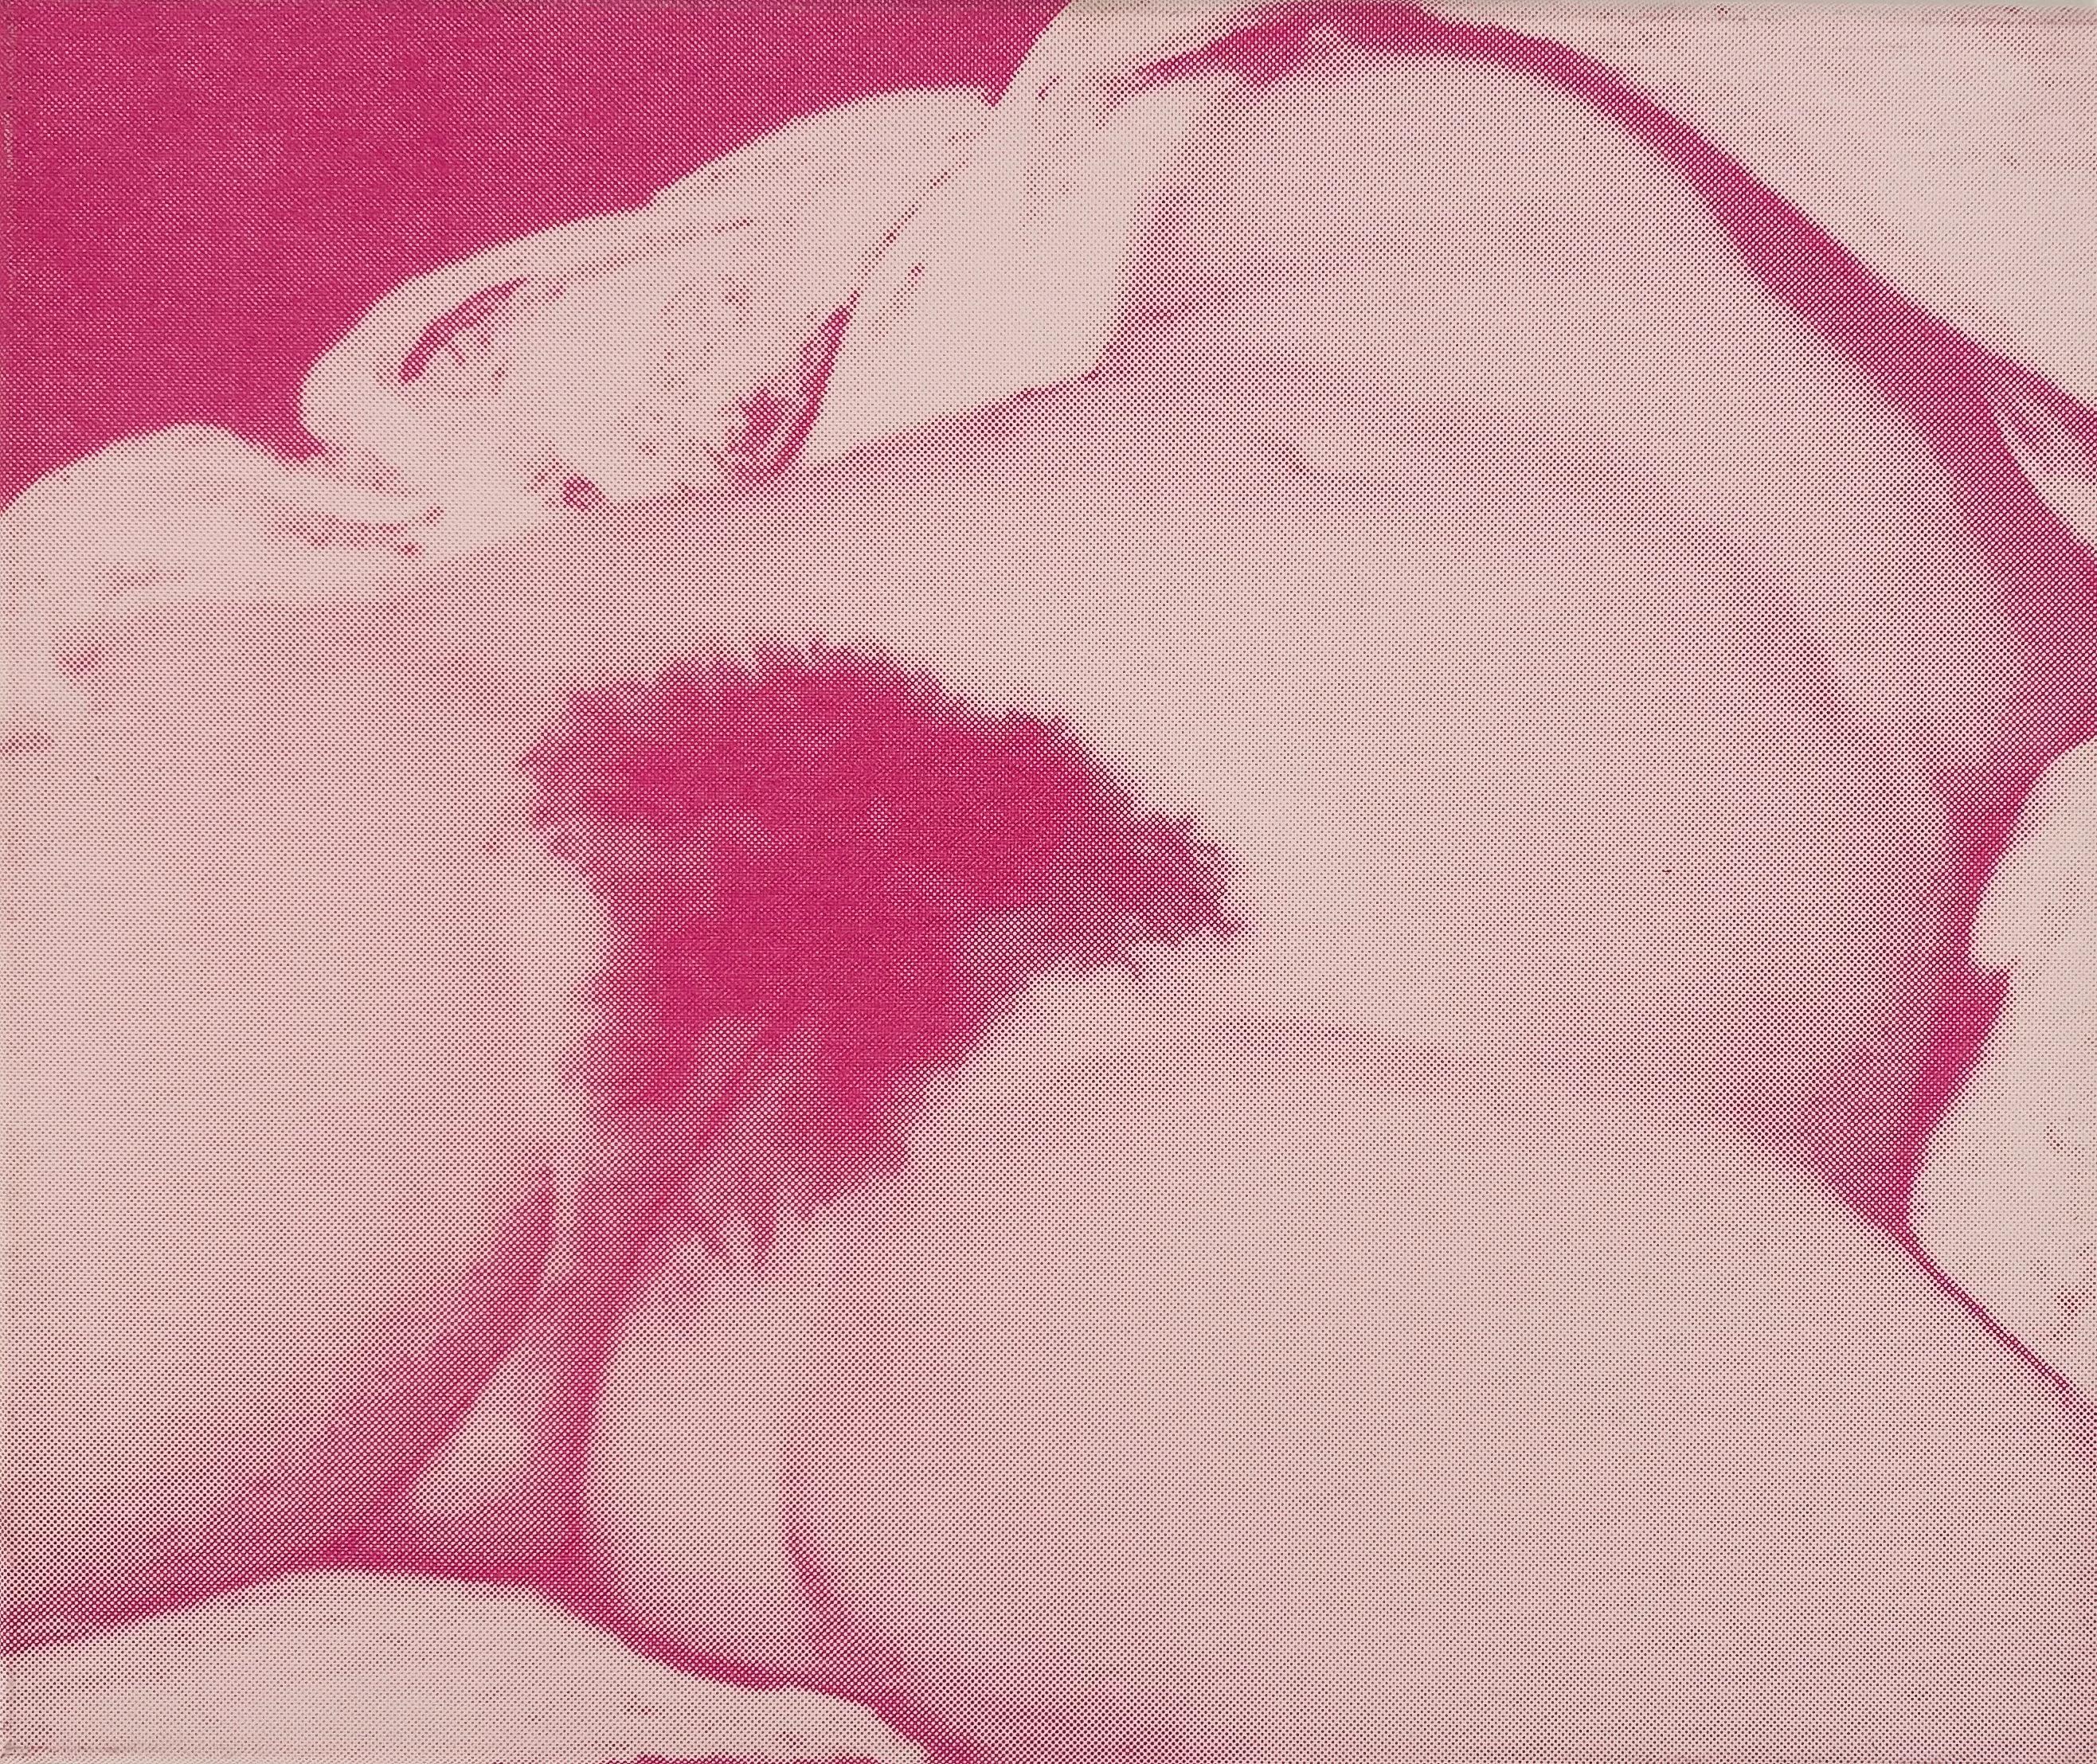 Susi Pop Nude Painting - L'origine (after Gustave Courbet) dispersion and silkscreen on canvas, 2005